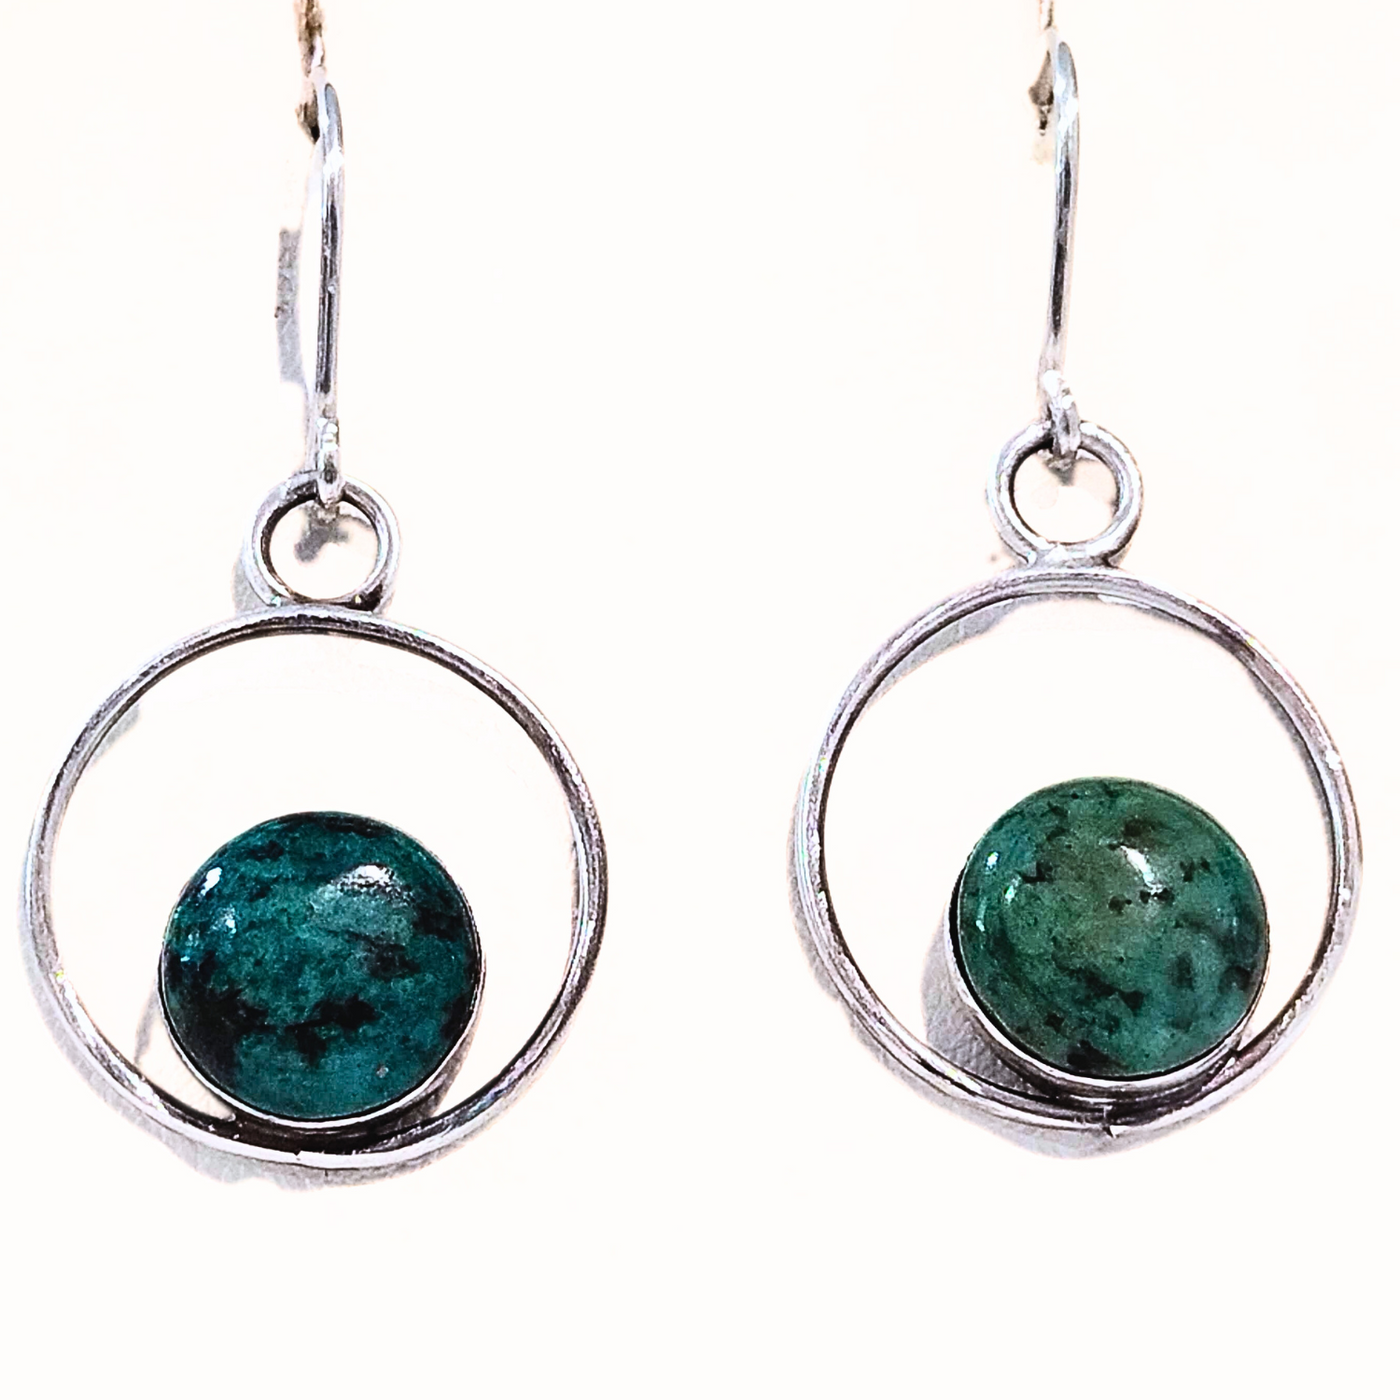 JEM-074 SS Round Turquoise Earring